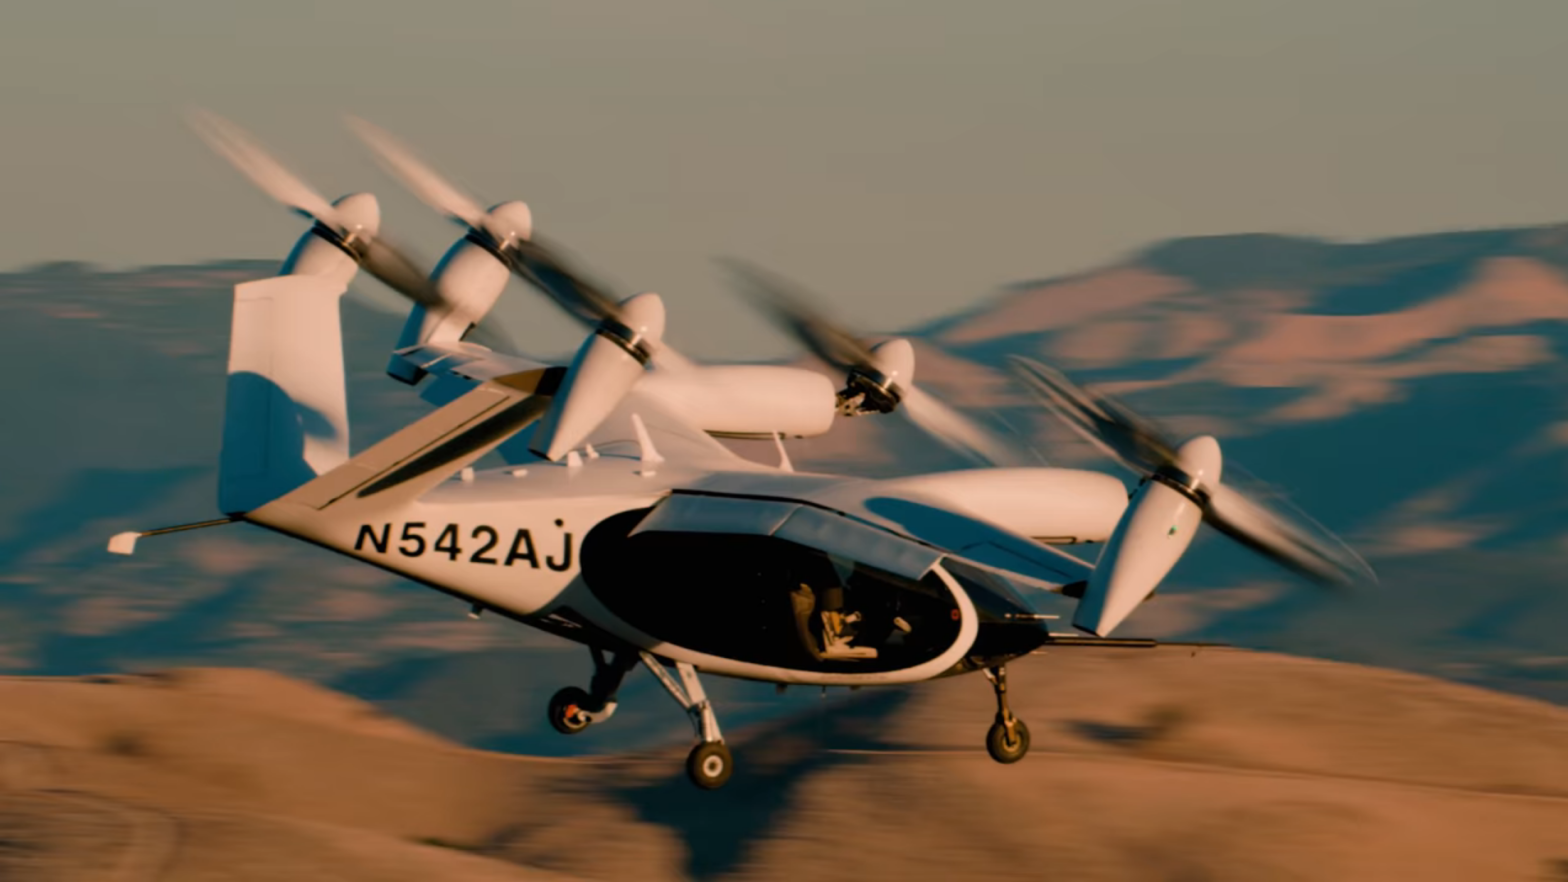 Joby Aviation's prototype craft flying in a promotional video. (Screenshot: Joby Aviation, Fair Use)